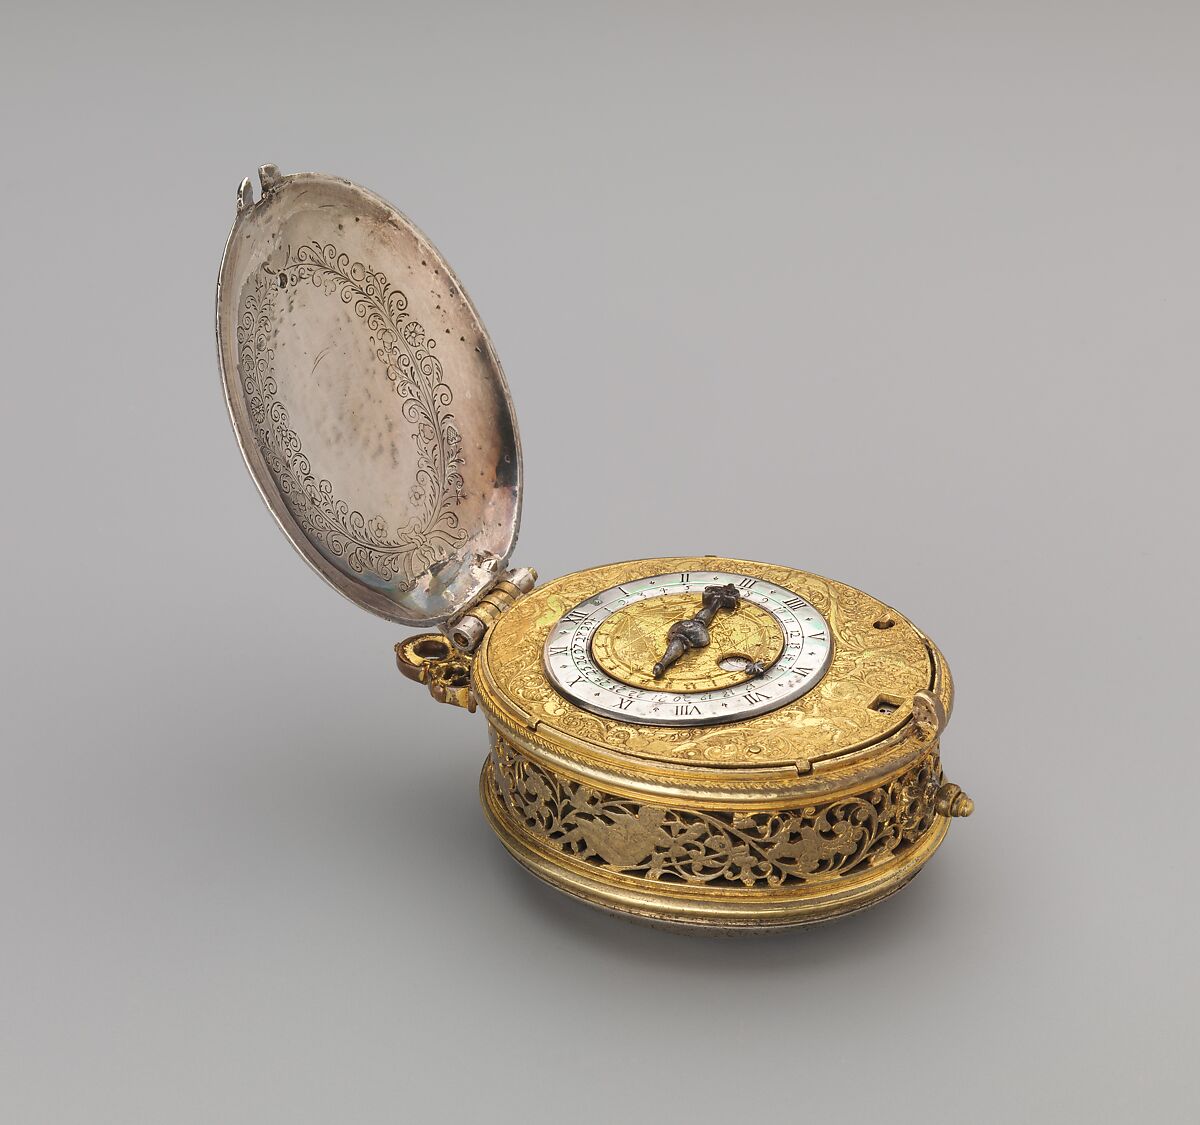 Clock-watch with alarm and calendar, Watchmaker: Nicolas Forfaict (French, Paris, ca. 1580–1615), Movement: gilded breass and steel, partly blued; case and dial: brass, silvered brass, silver; hand: steel, French, Paris 